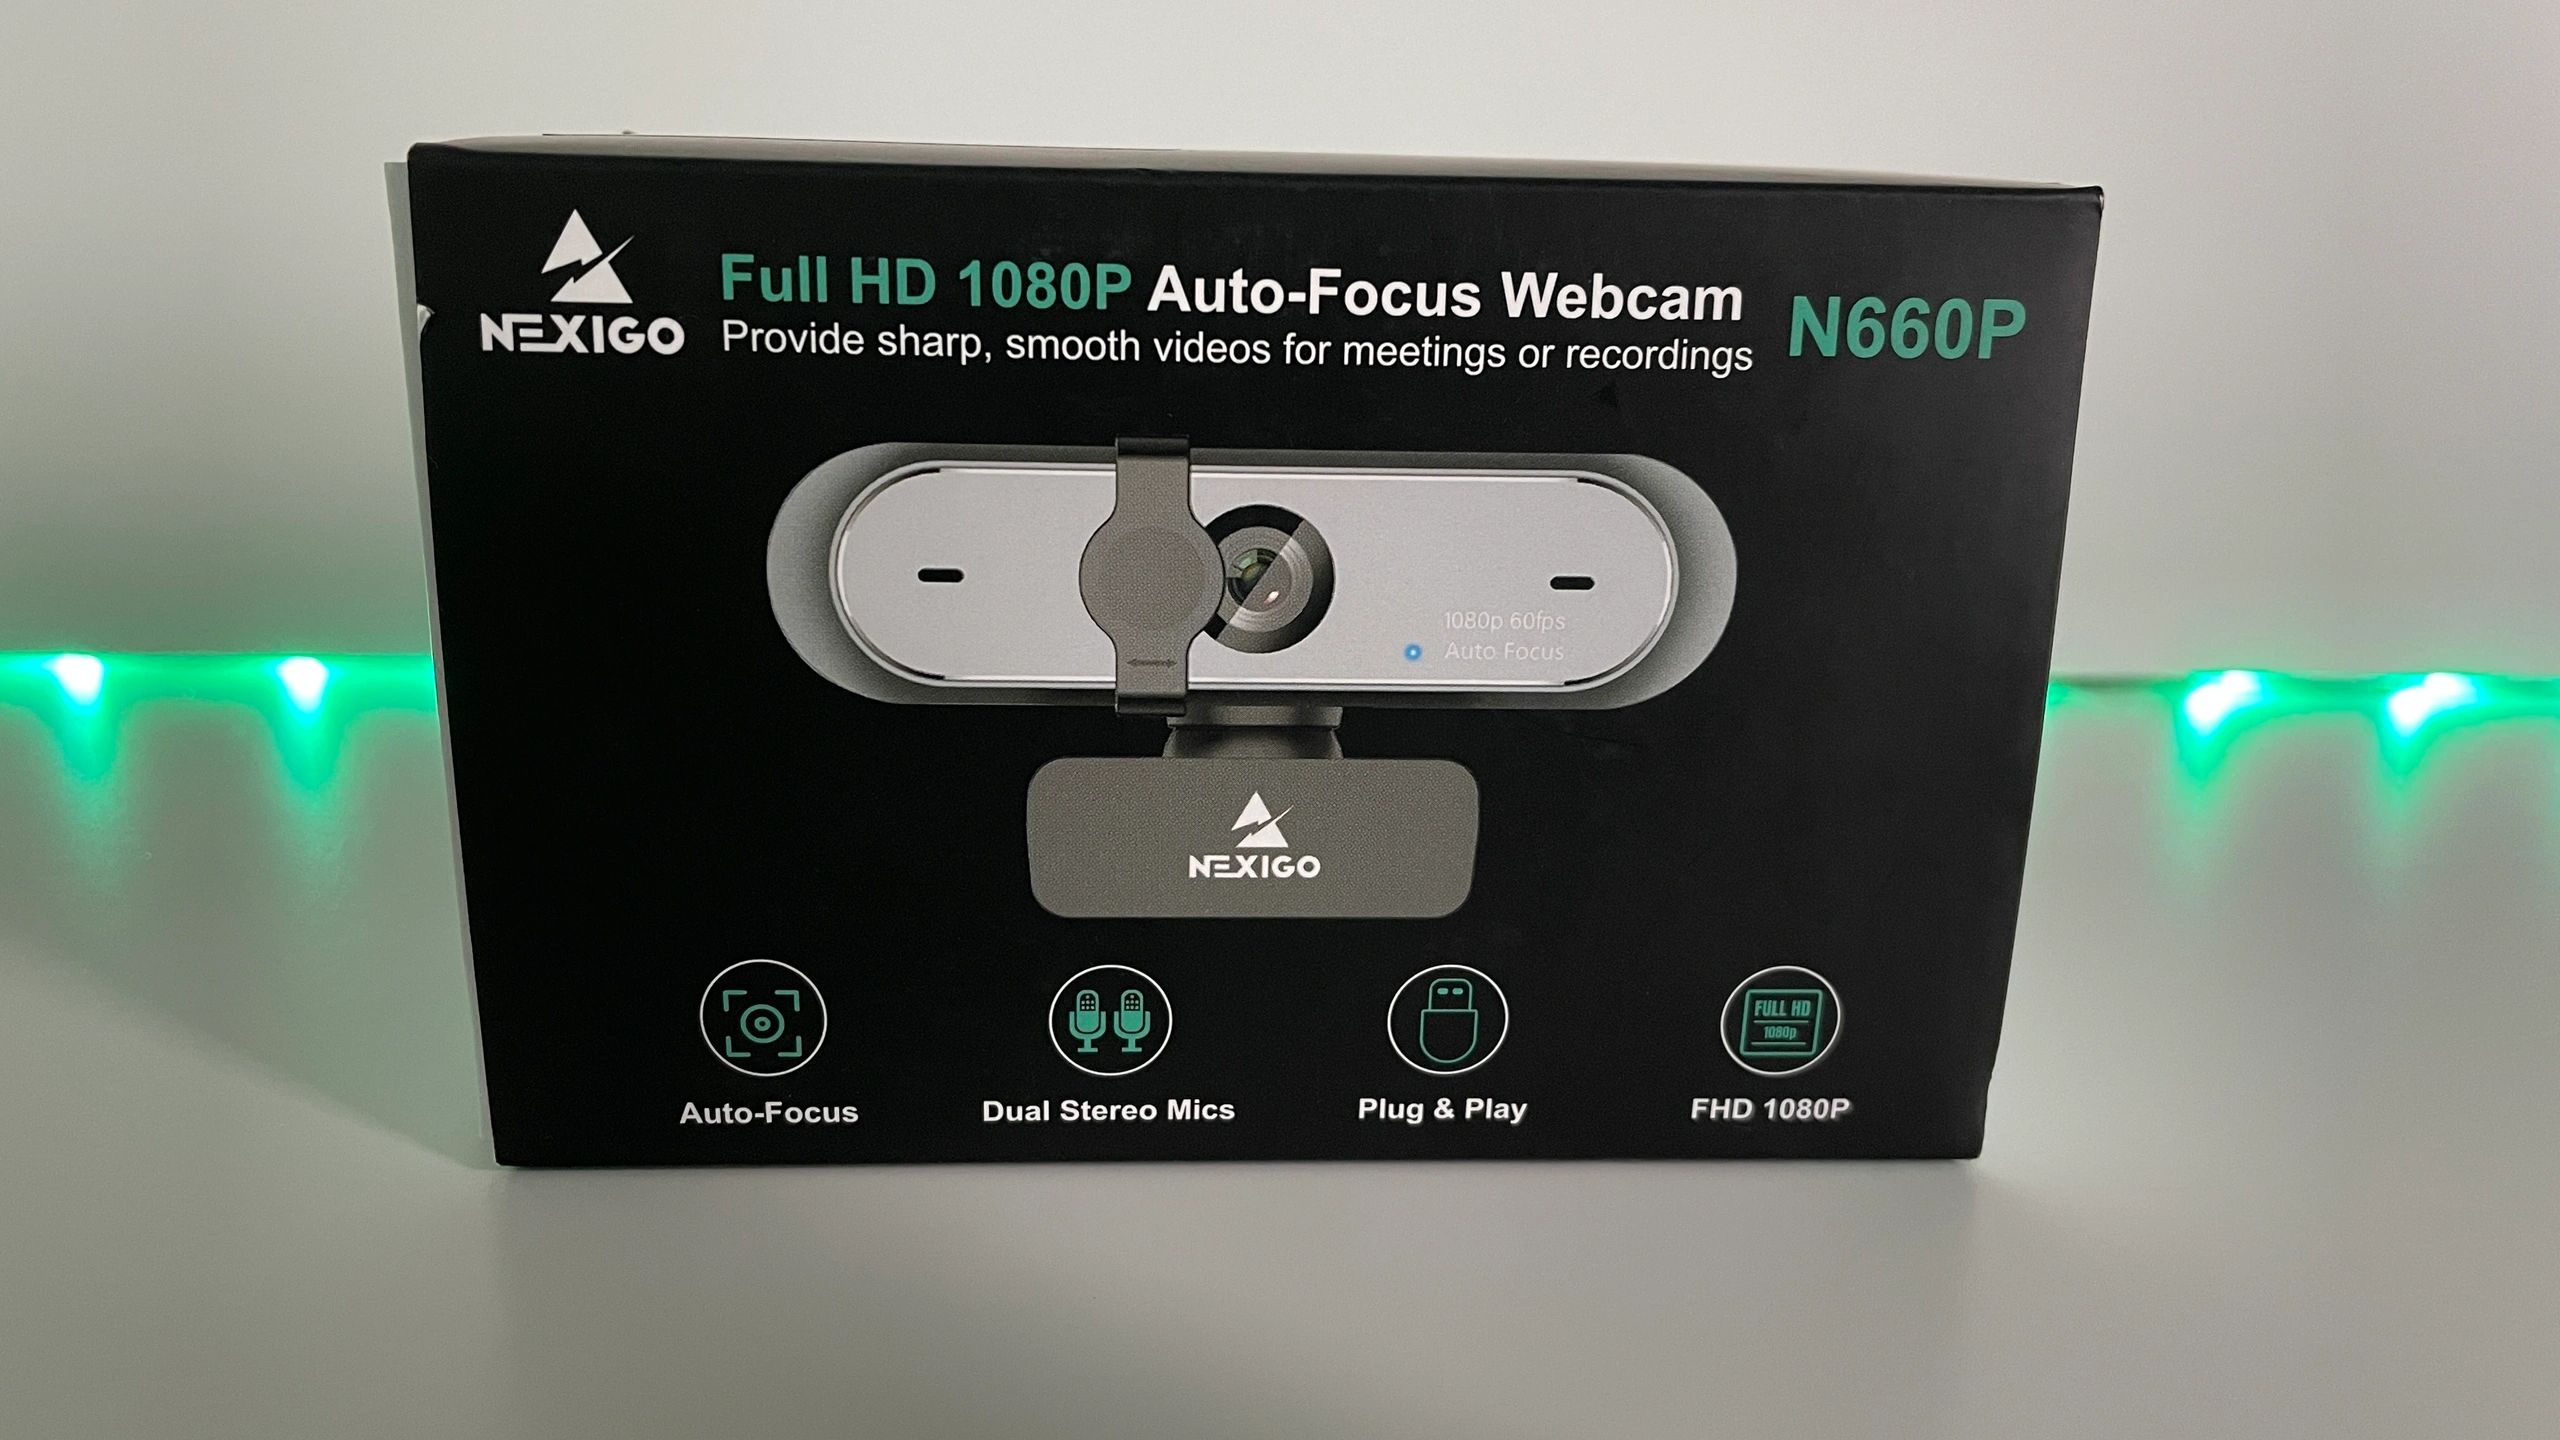 The Best 60 fps HD Webcam for 2021! The Nexigo N660P 1080p Unboxing and  Review! 